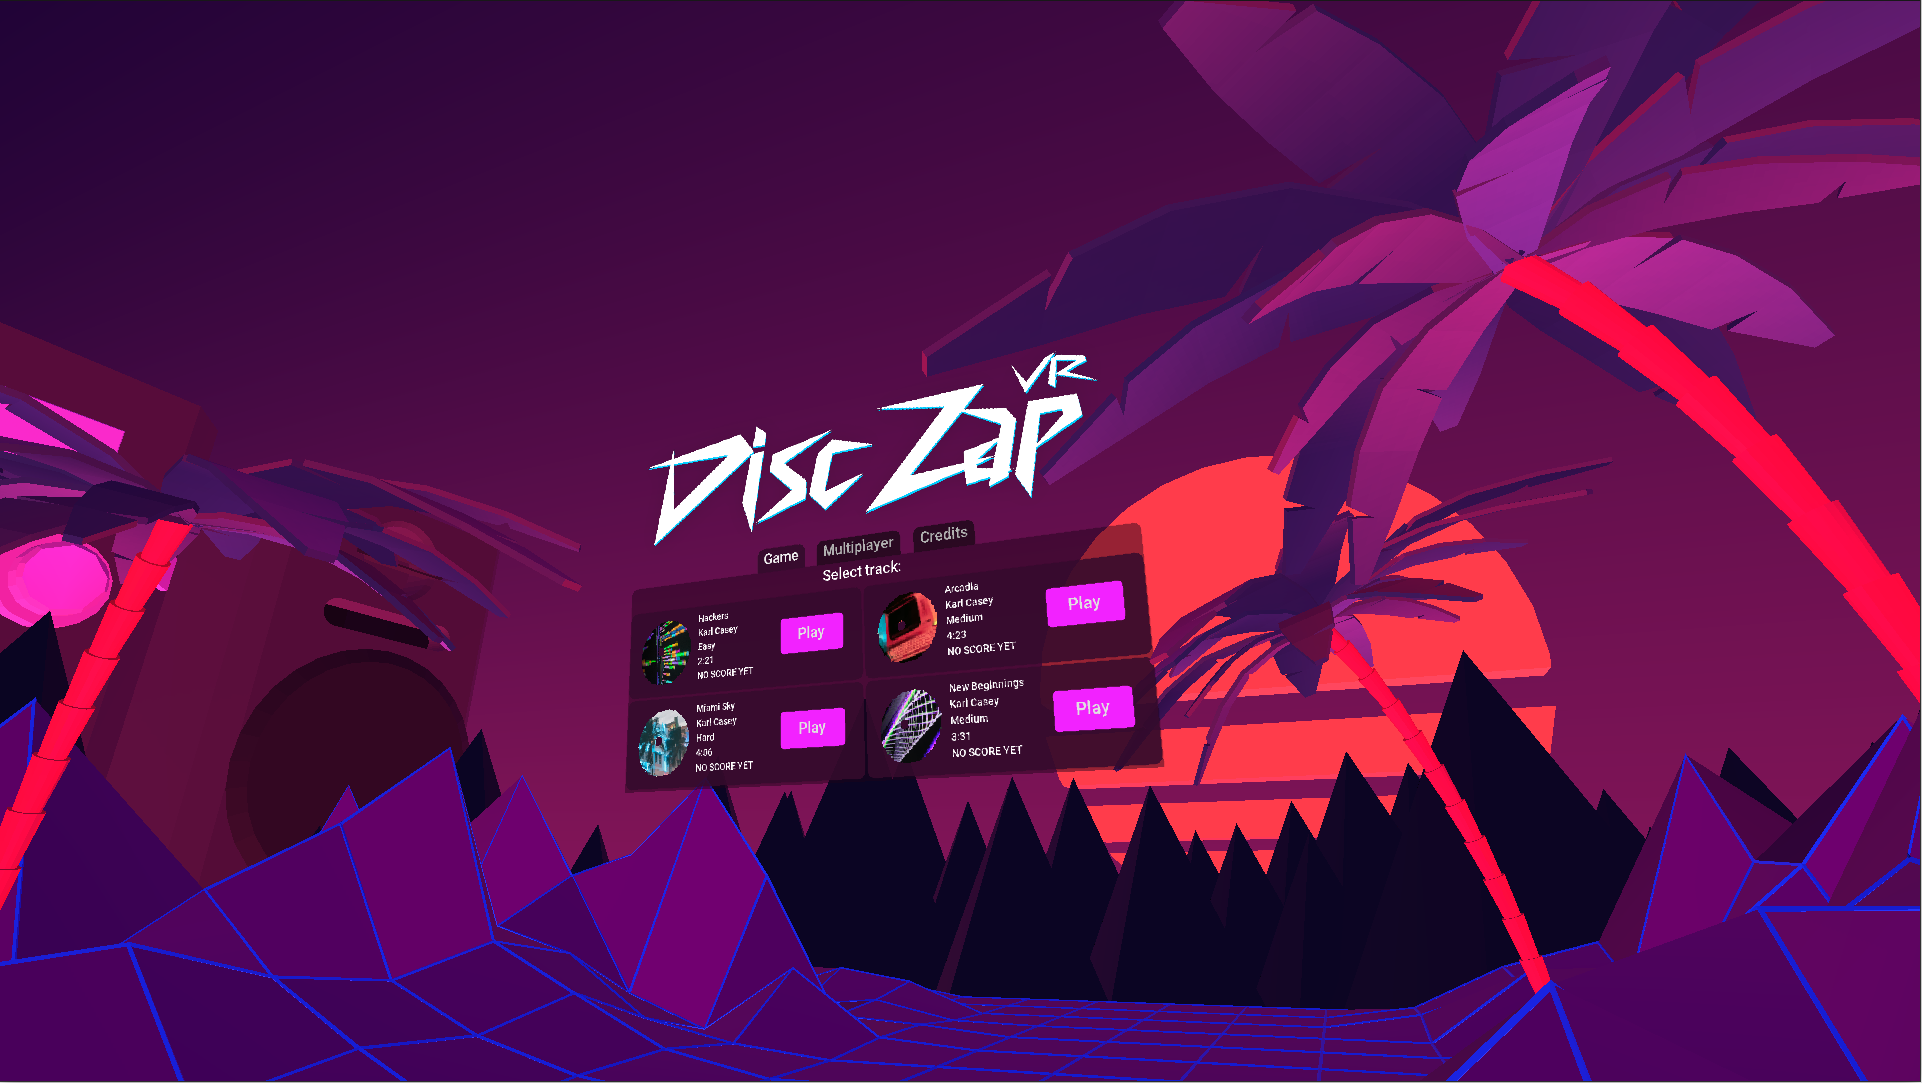 Disc Zap Vr On Sidequest Oculus Quest Games And Apps Including Applab